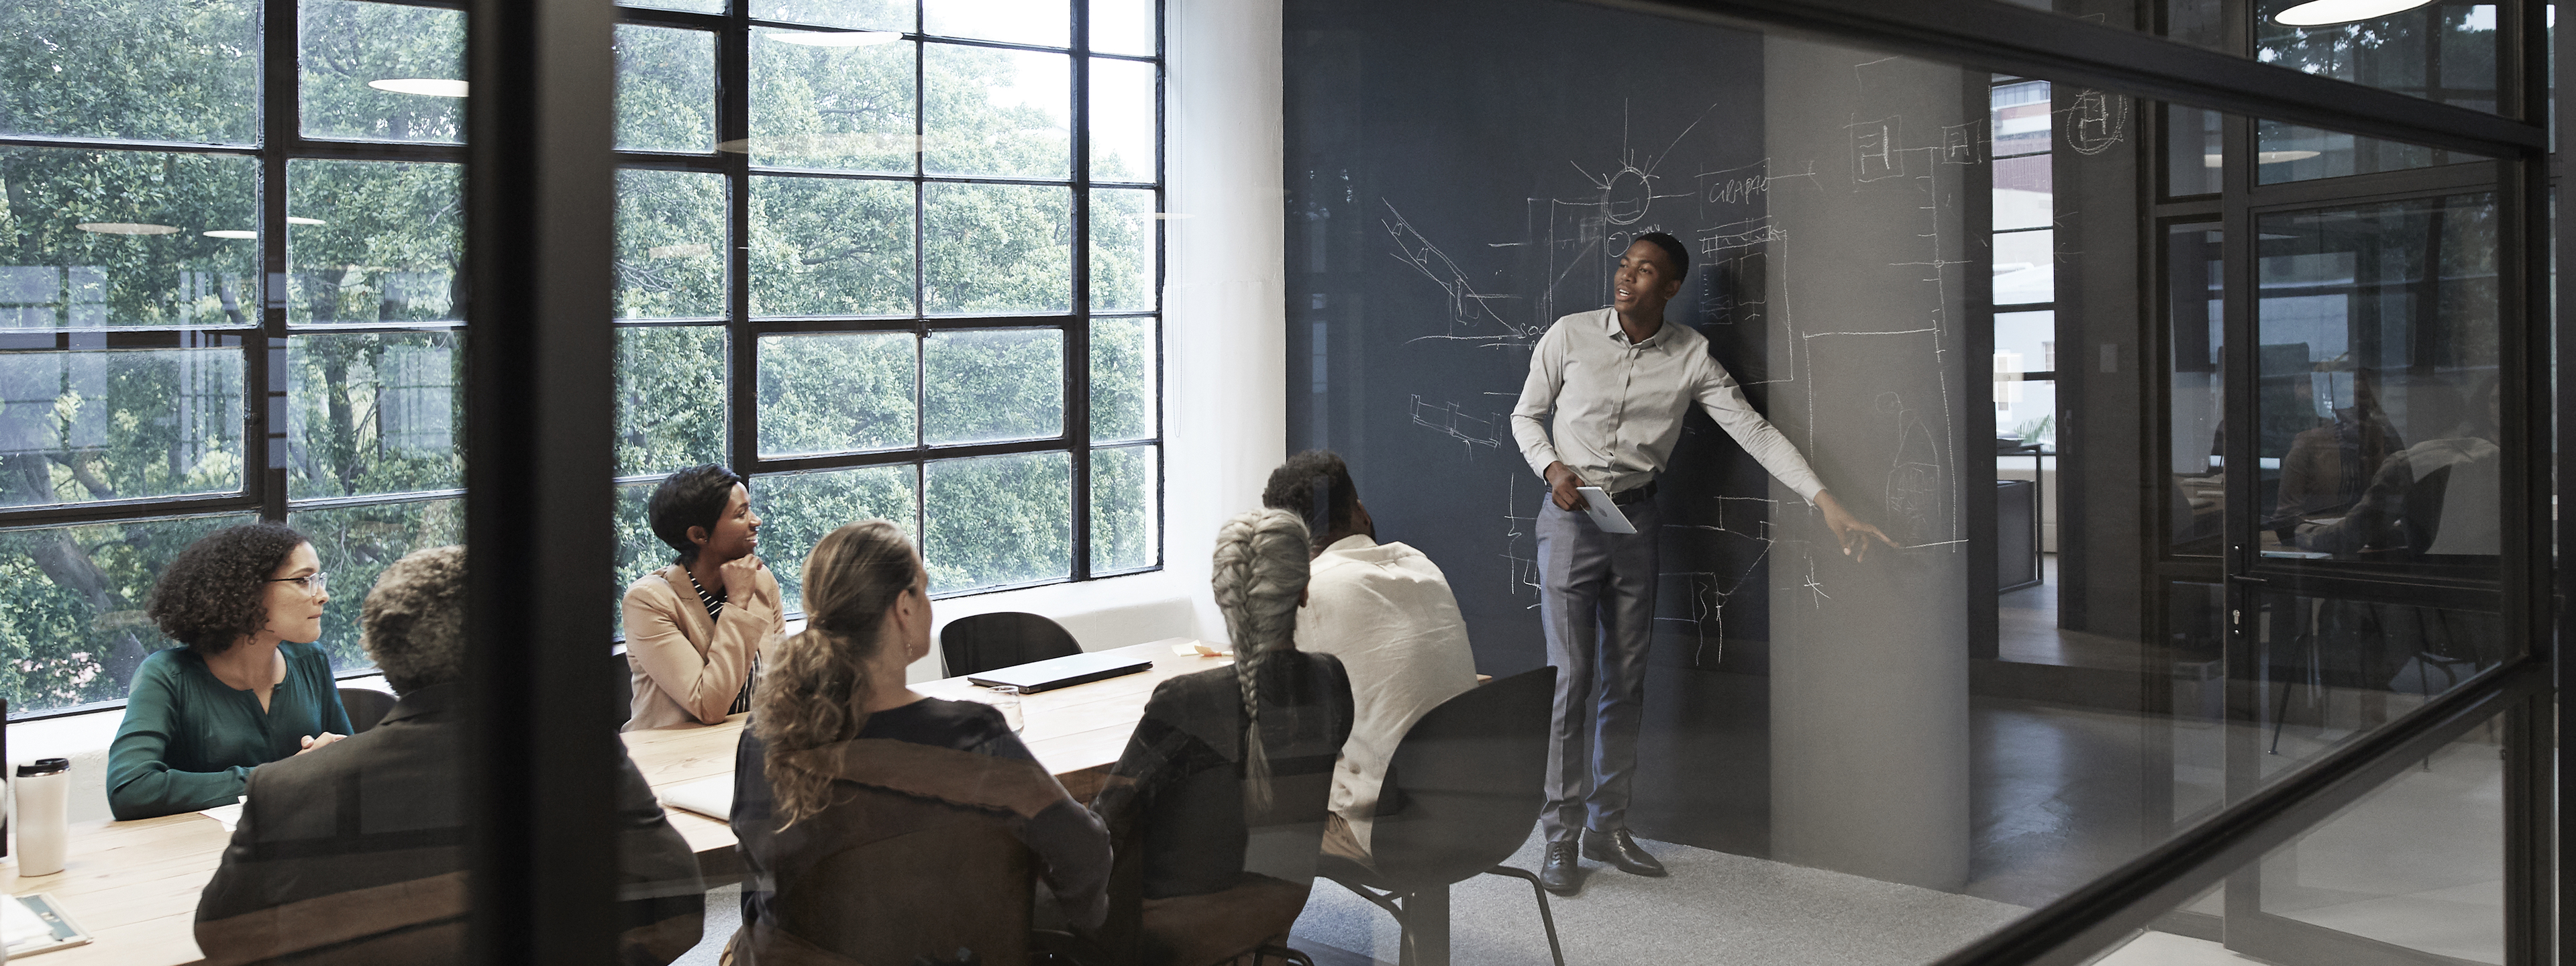 Image of male instructor, discussing , teaching a group of people, or students in a modern conference room pointing at chalkboard, Q3 2021, TAA NA US - Preparer